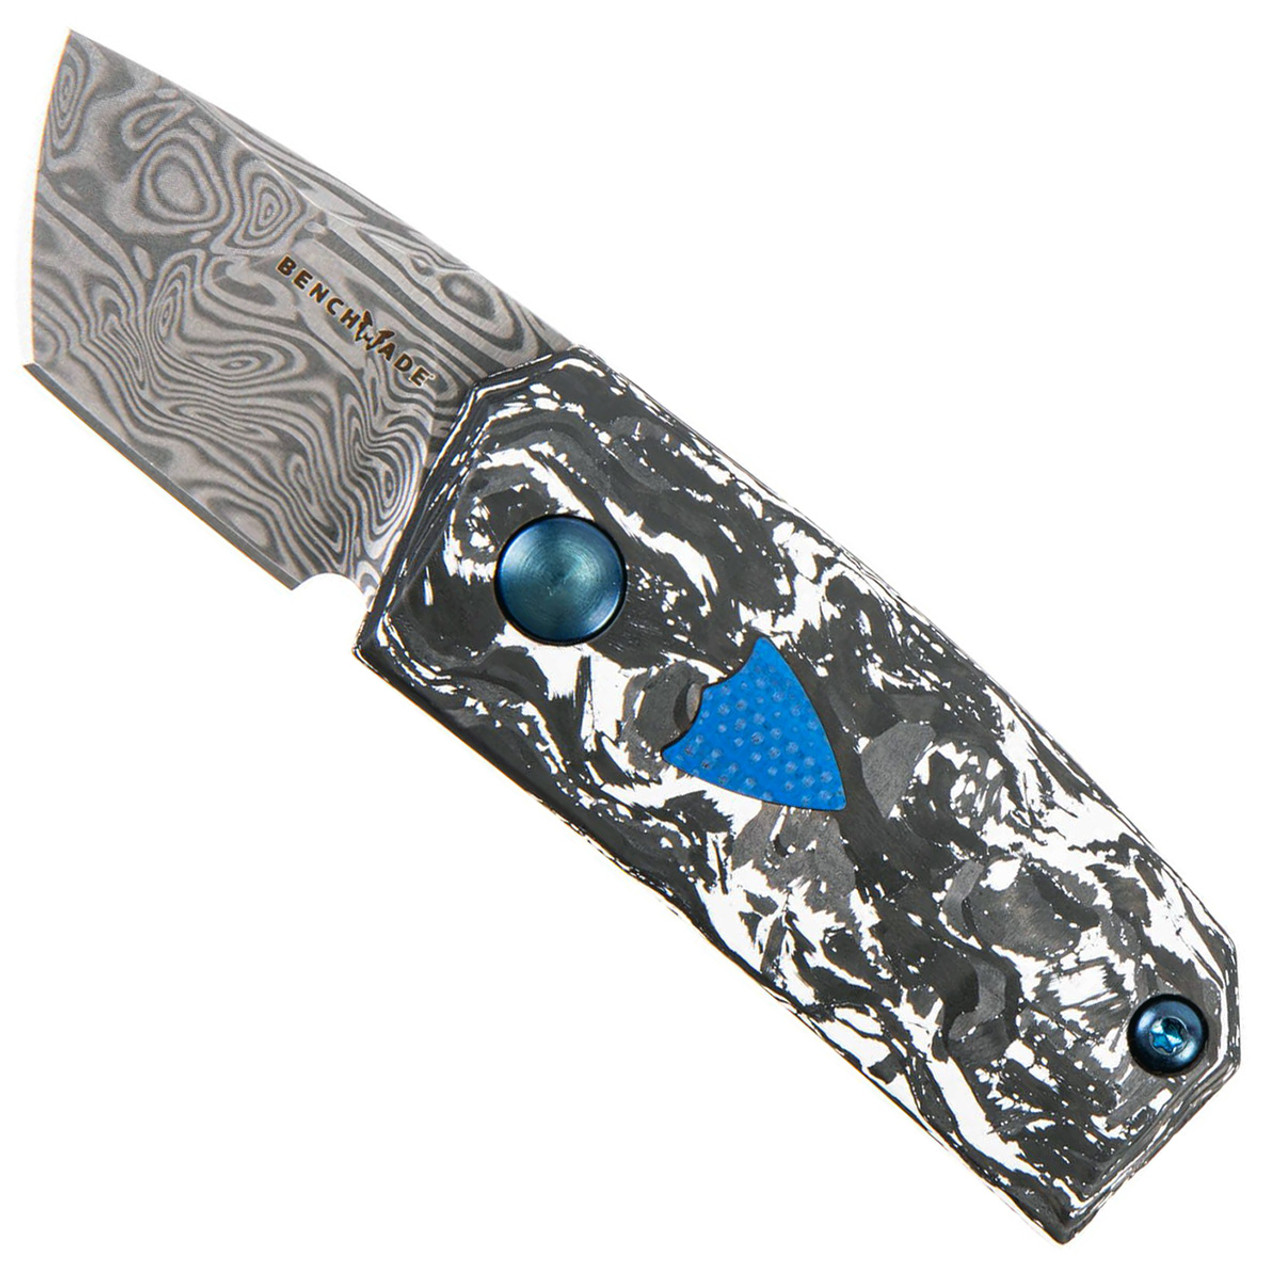 https://cdn11.bigcommerce.com/s-1tyihs272l/images/stencil/1280x1280/products/6245/13960/Benchmade-602-211-Tengu-Tool-Fat-Carbon-Damascus-Gold-Glass__07932.1636741852.jpg?c=2